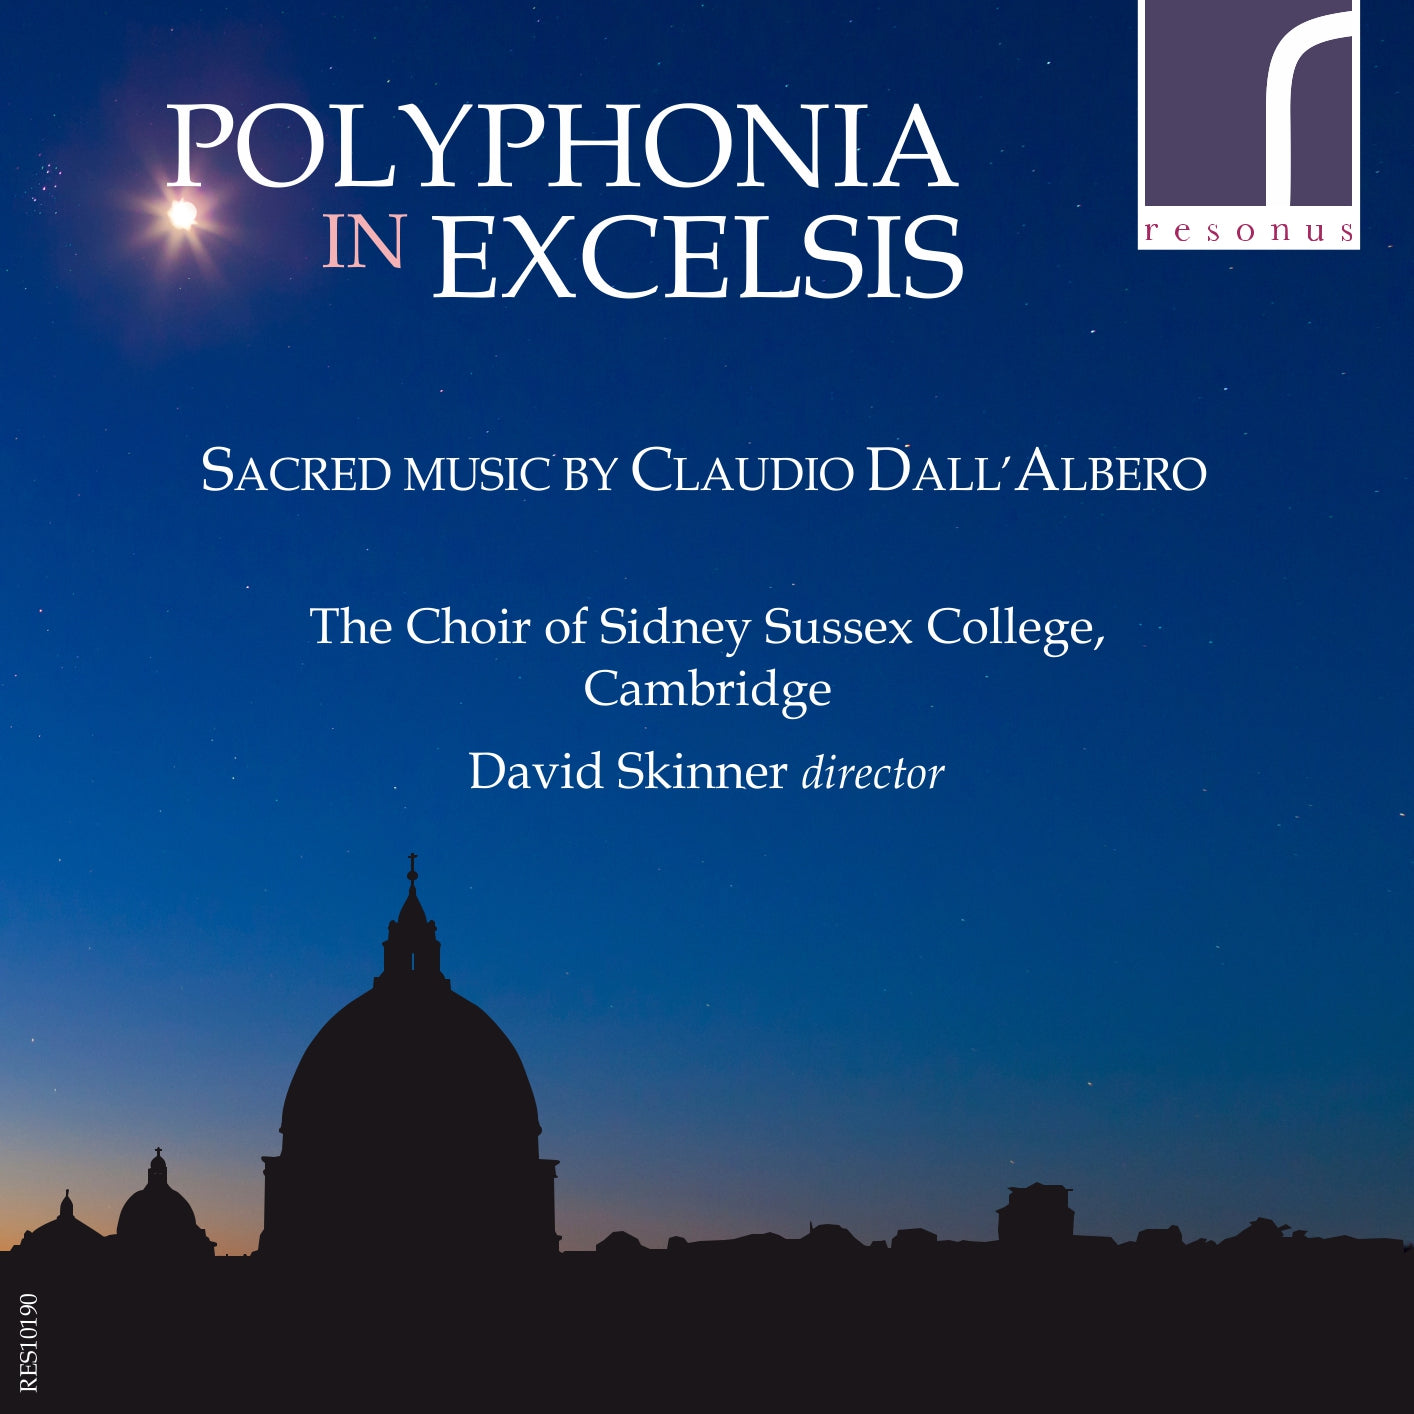 Polyphonia in Excelsis: Sacred Music by Claudio Dall'Albero